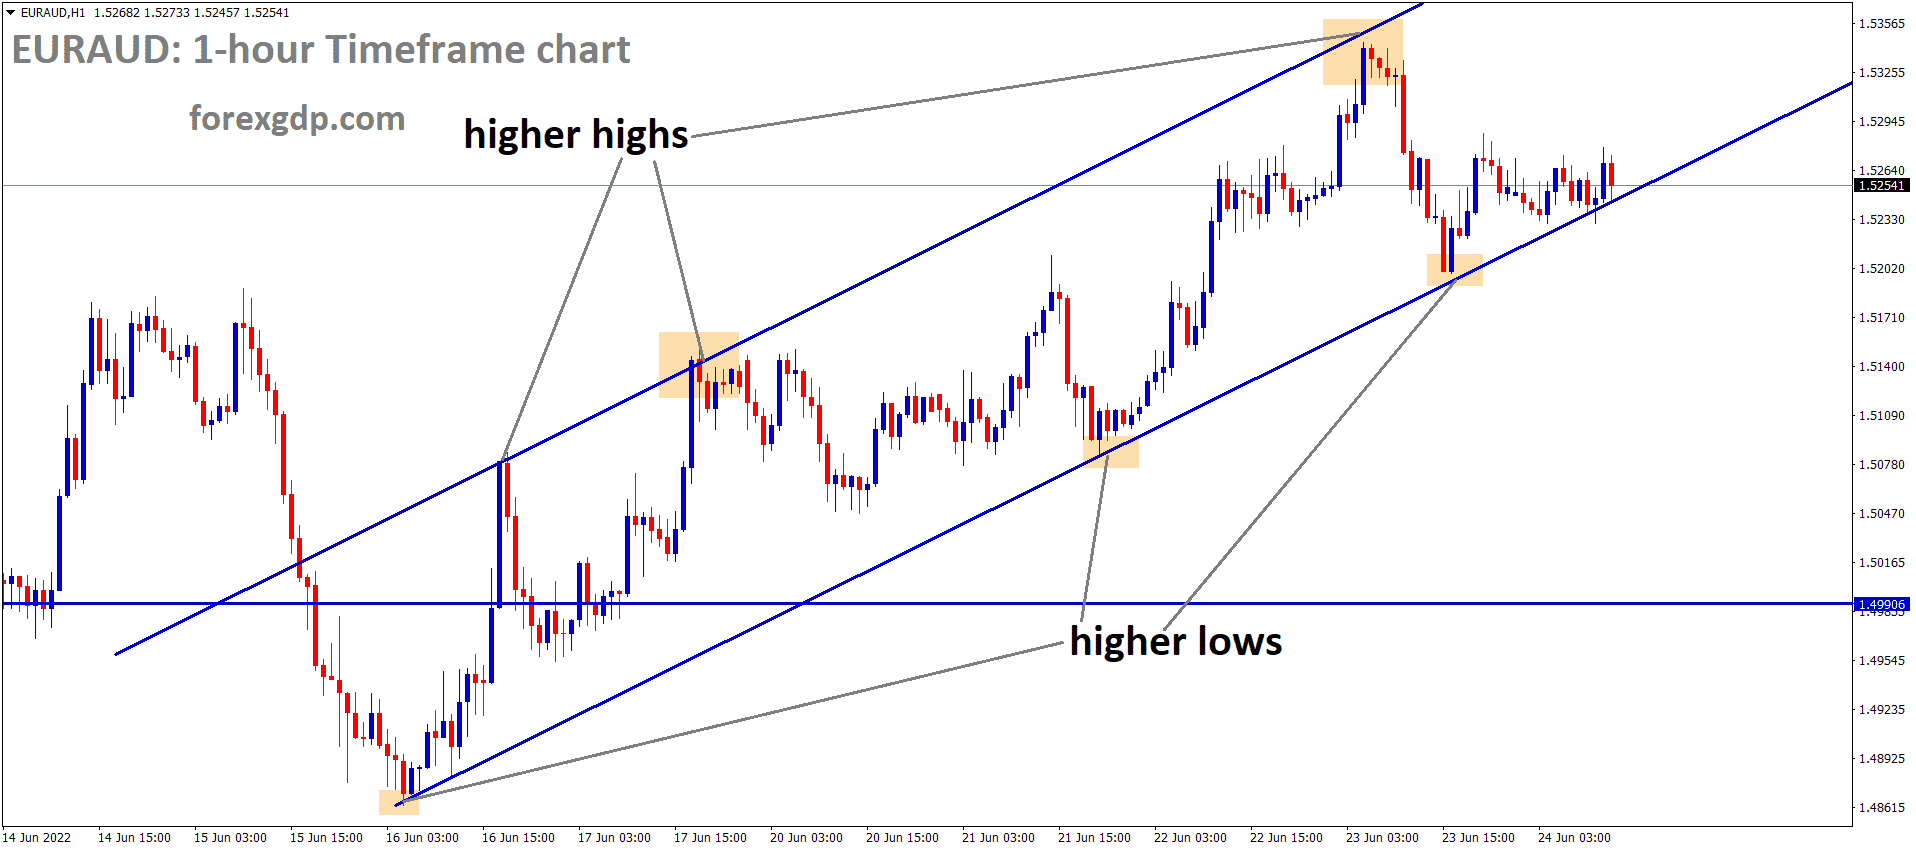 EURAUD is moving in an Ascending channel and the Market has rebounded from the higher low area of the channel